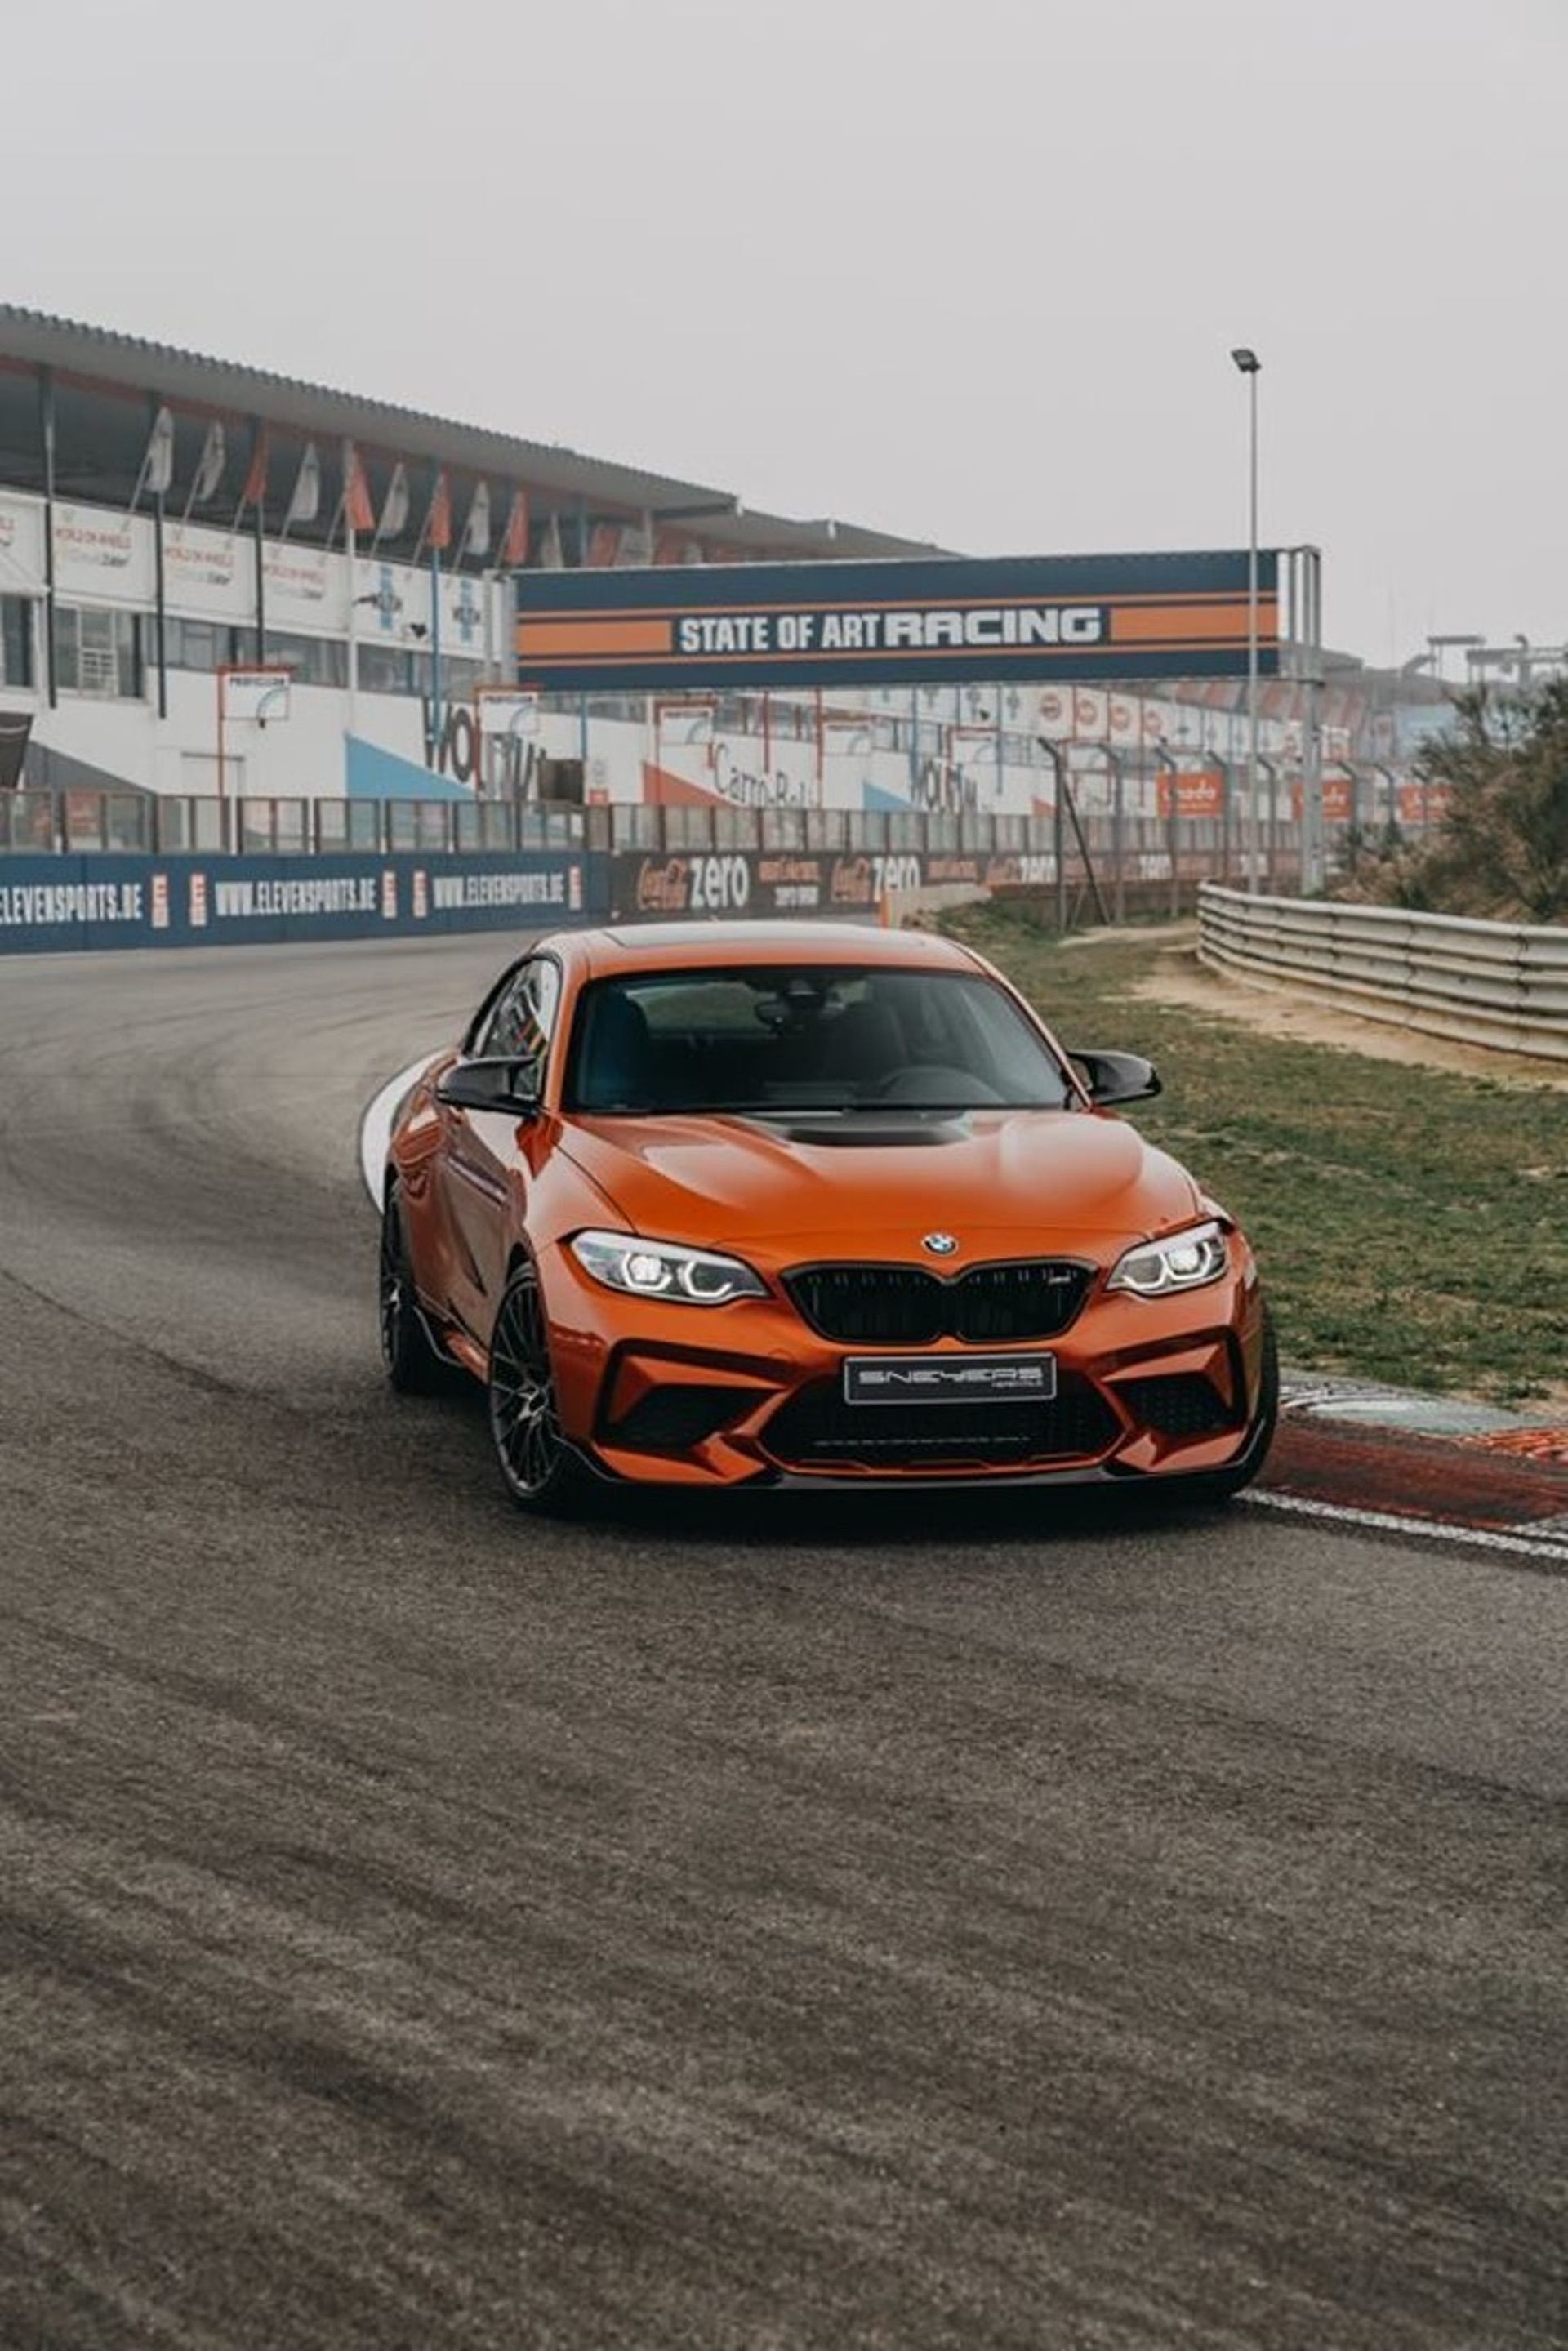 This BMW M2 with M Performance Parts has gone full *Fast & Furious